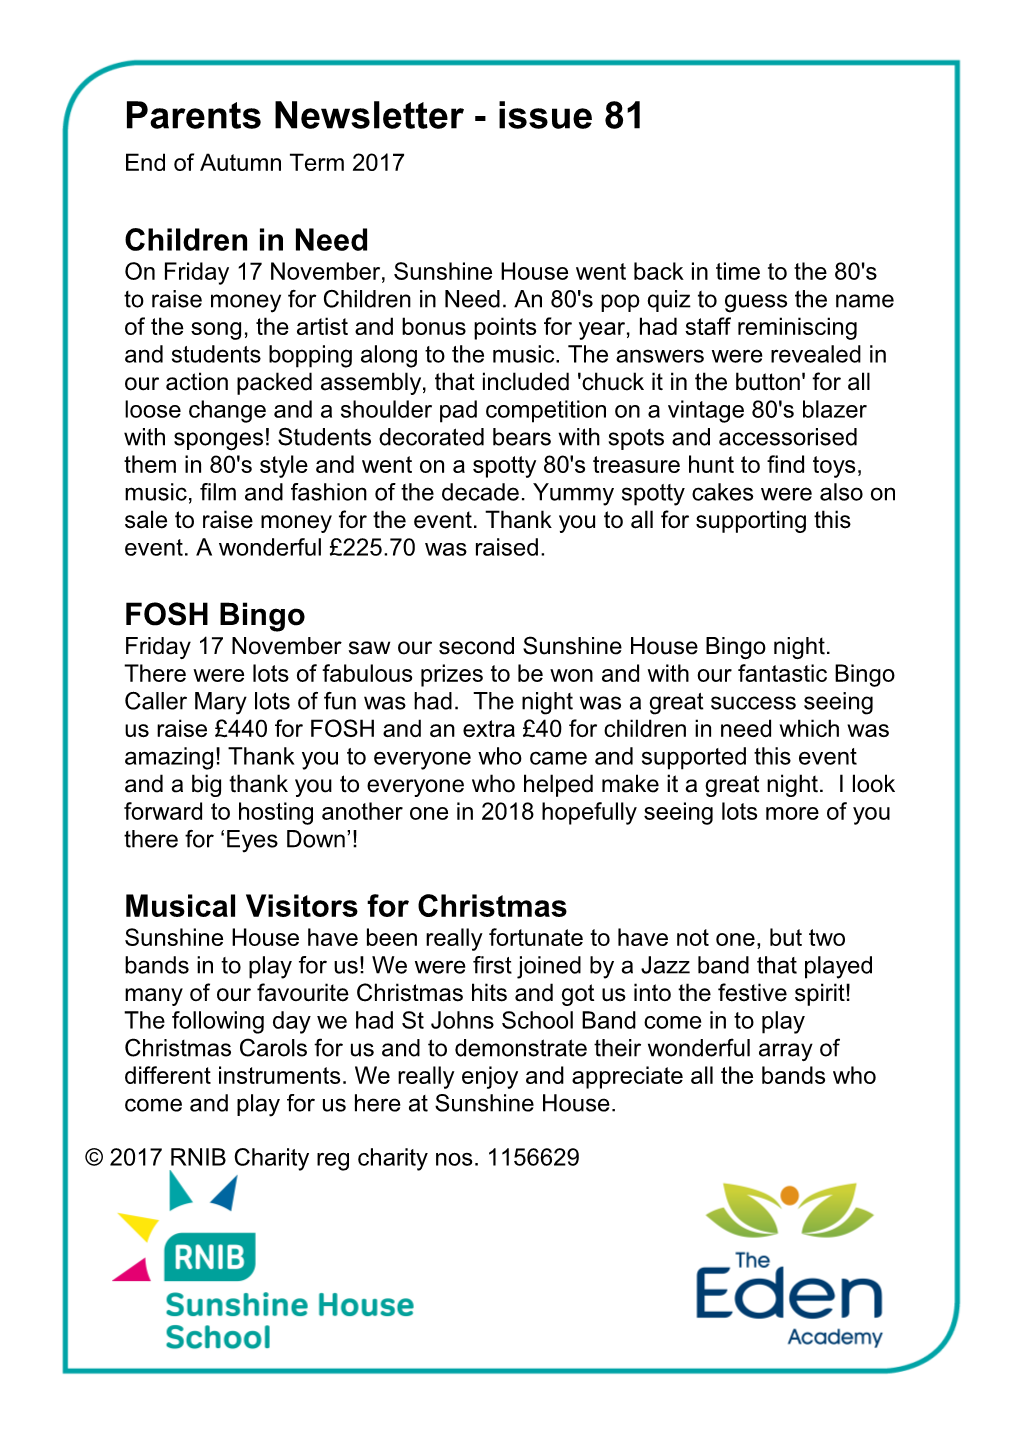 Parents Newsletter - Issue 81